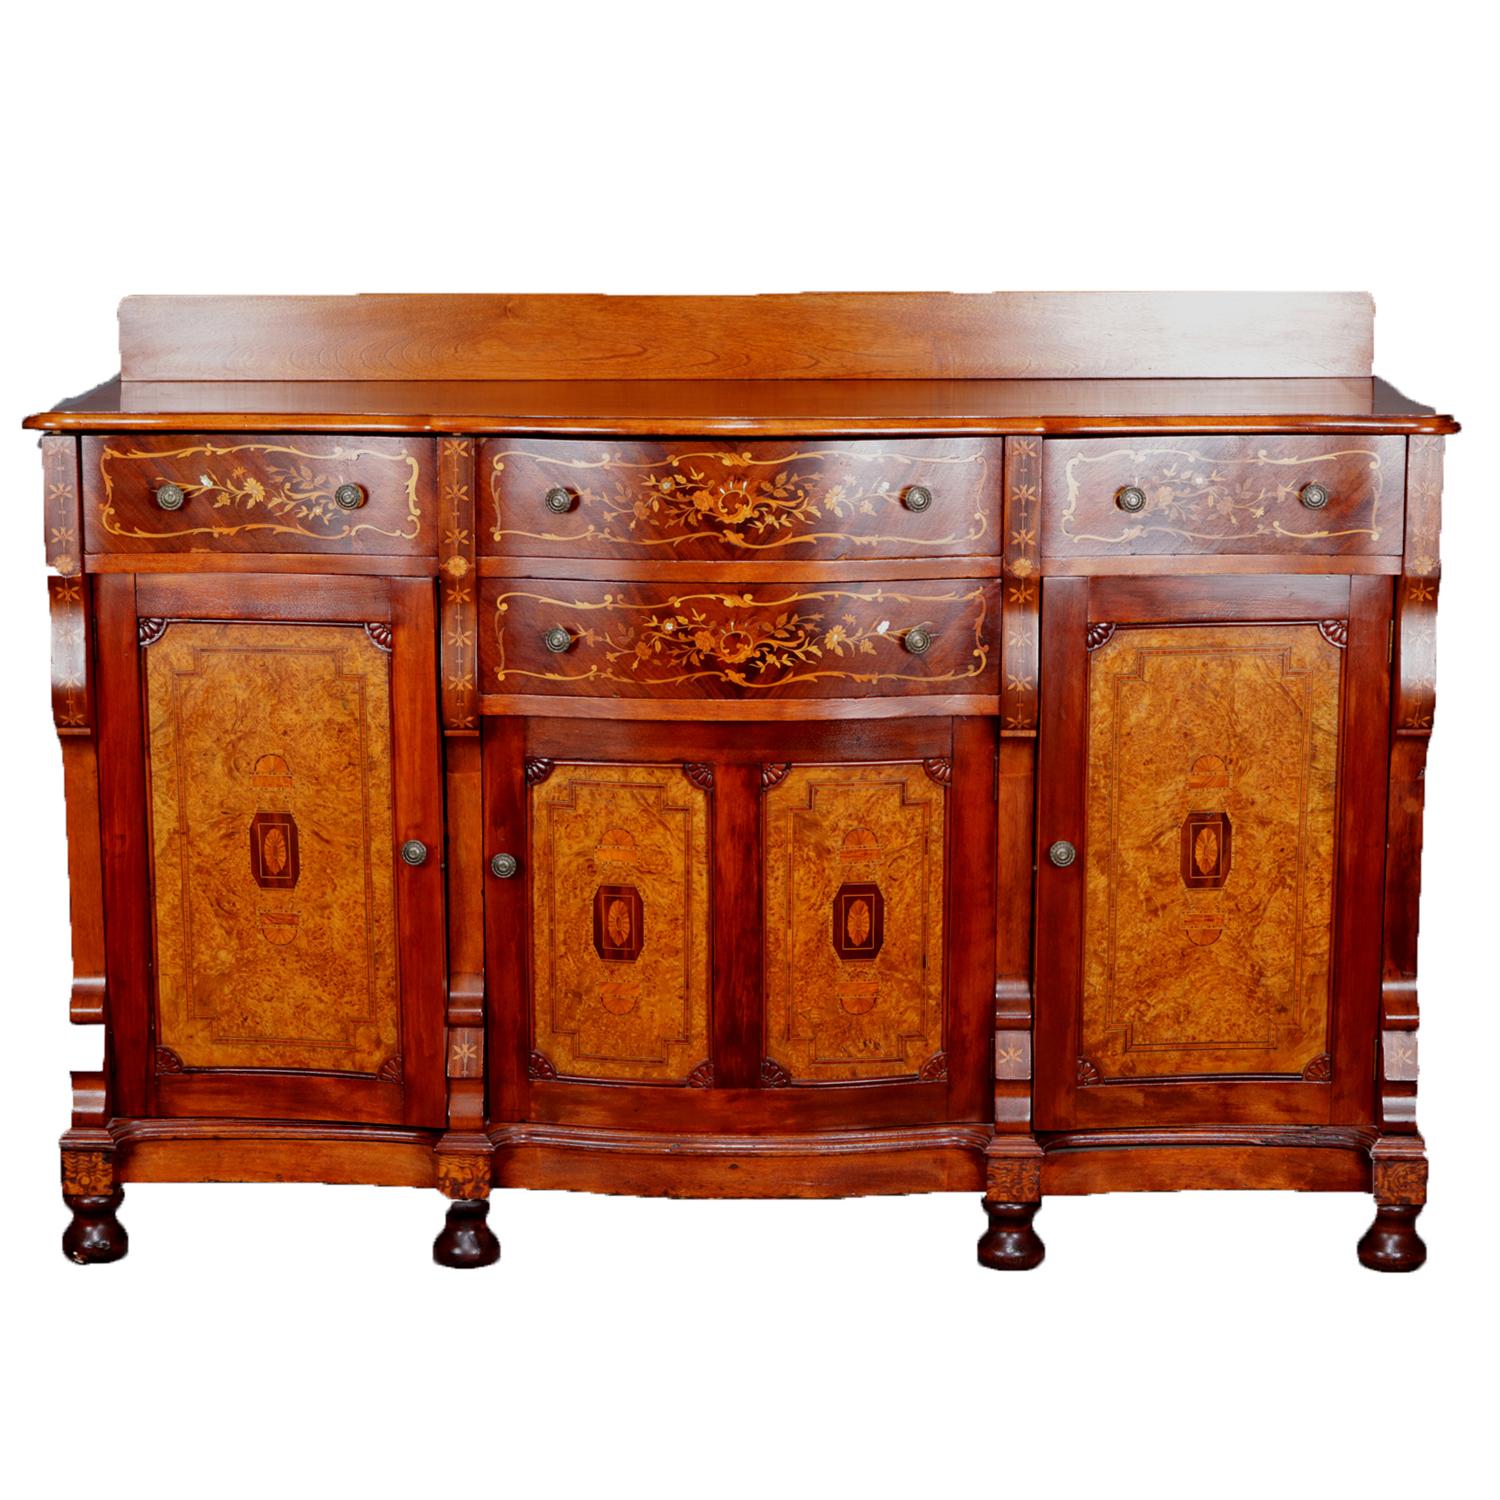 Antique R.J. Horner School sideboard features top with backsplash above four drawers with stainwood and mother-of-pearl floral and foliate marquetry inlay over double door central cabinet with two flanking cabinets all having reserves with burl